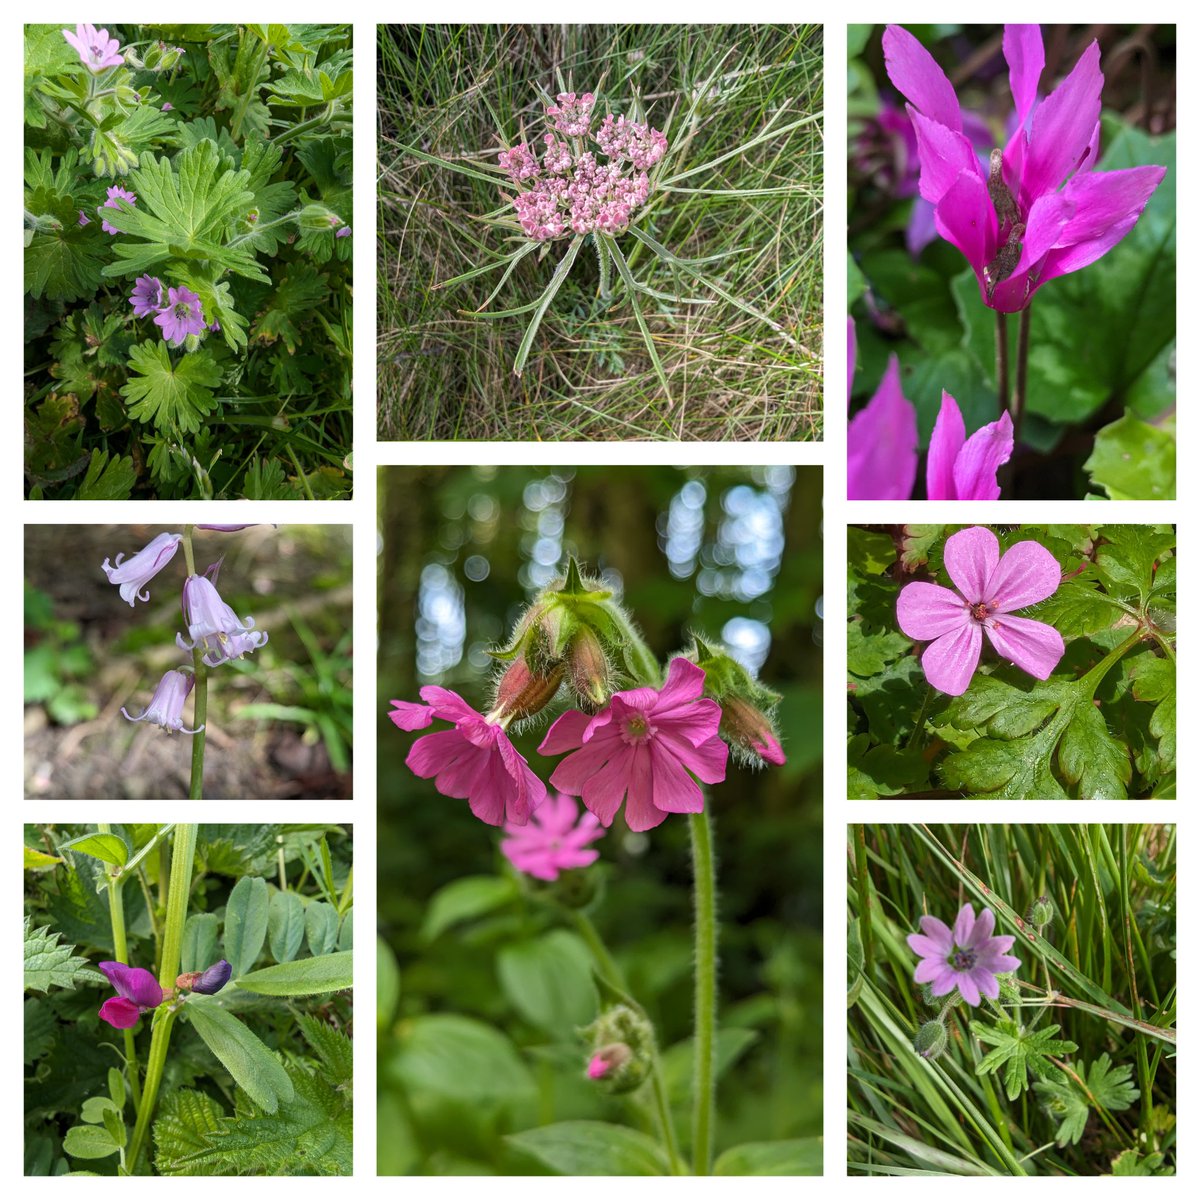 My other whoops on the #PinkFamily front for #WildFlowerHour comes from the threatened coastal woodland habitat at Penrhos Coastal Park #Anglesey Dove's-foot Cranesbill, Wild Carrot, Cyclamen repandum, a pink Bluebell, Red Campion, Herb-Robert, Common Vetch @PenrhosSave